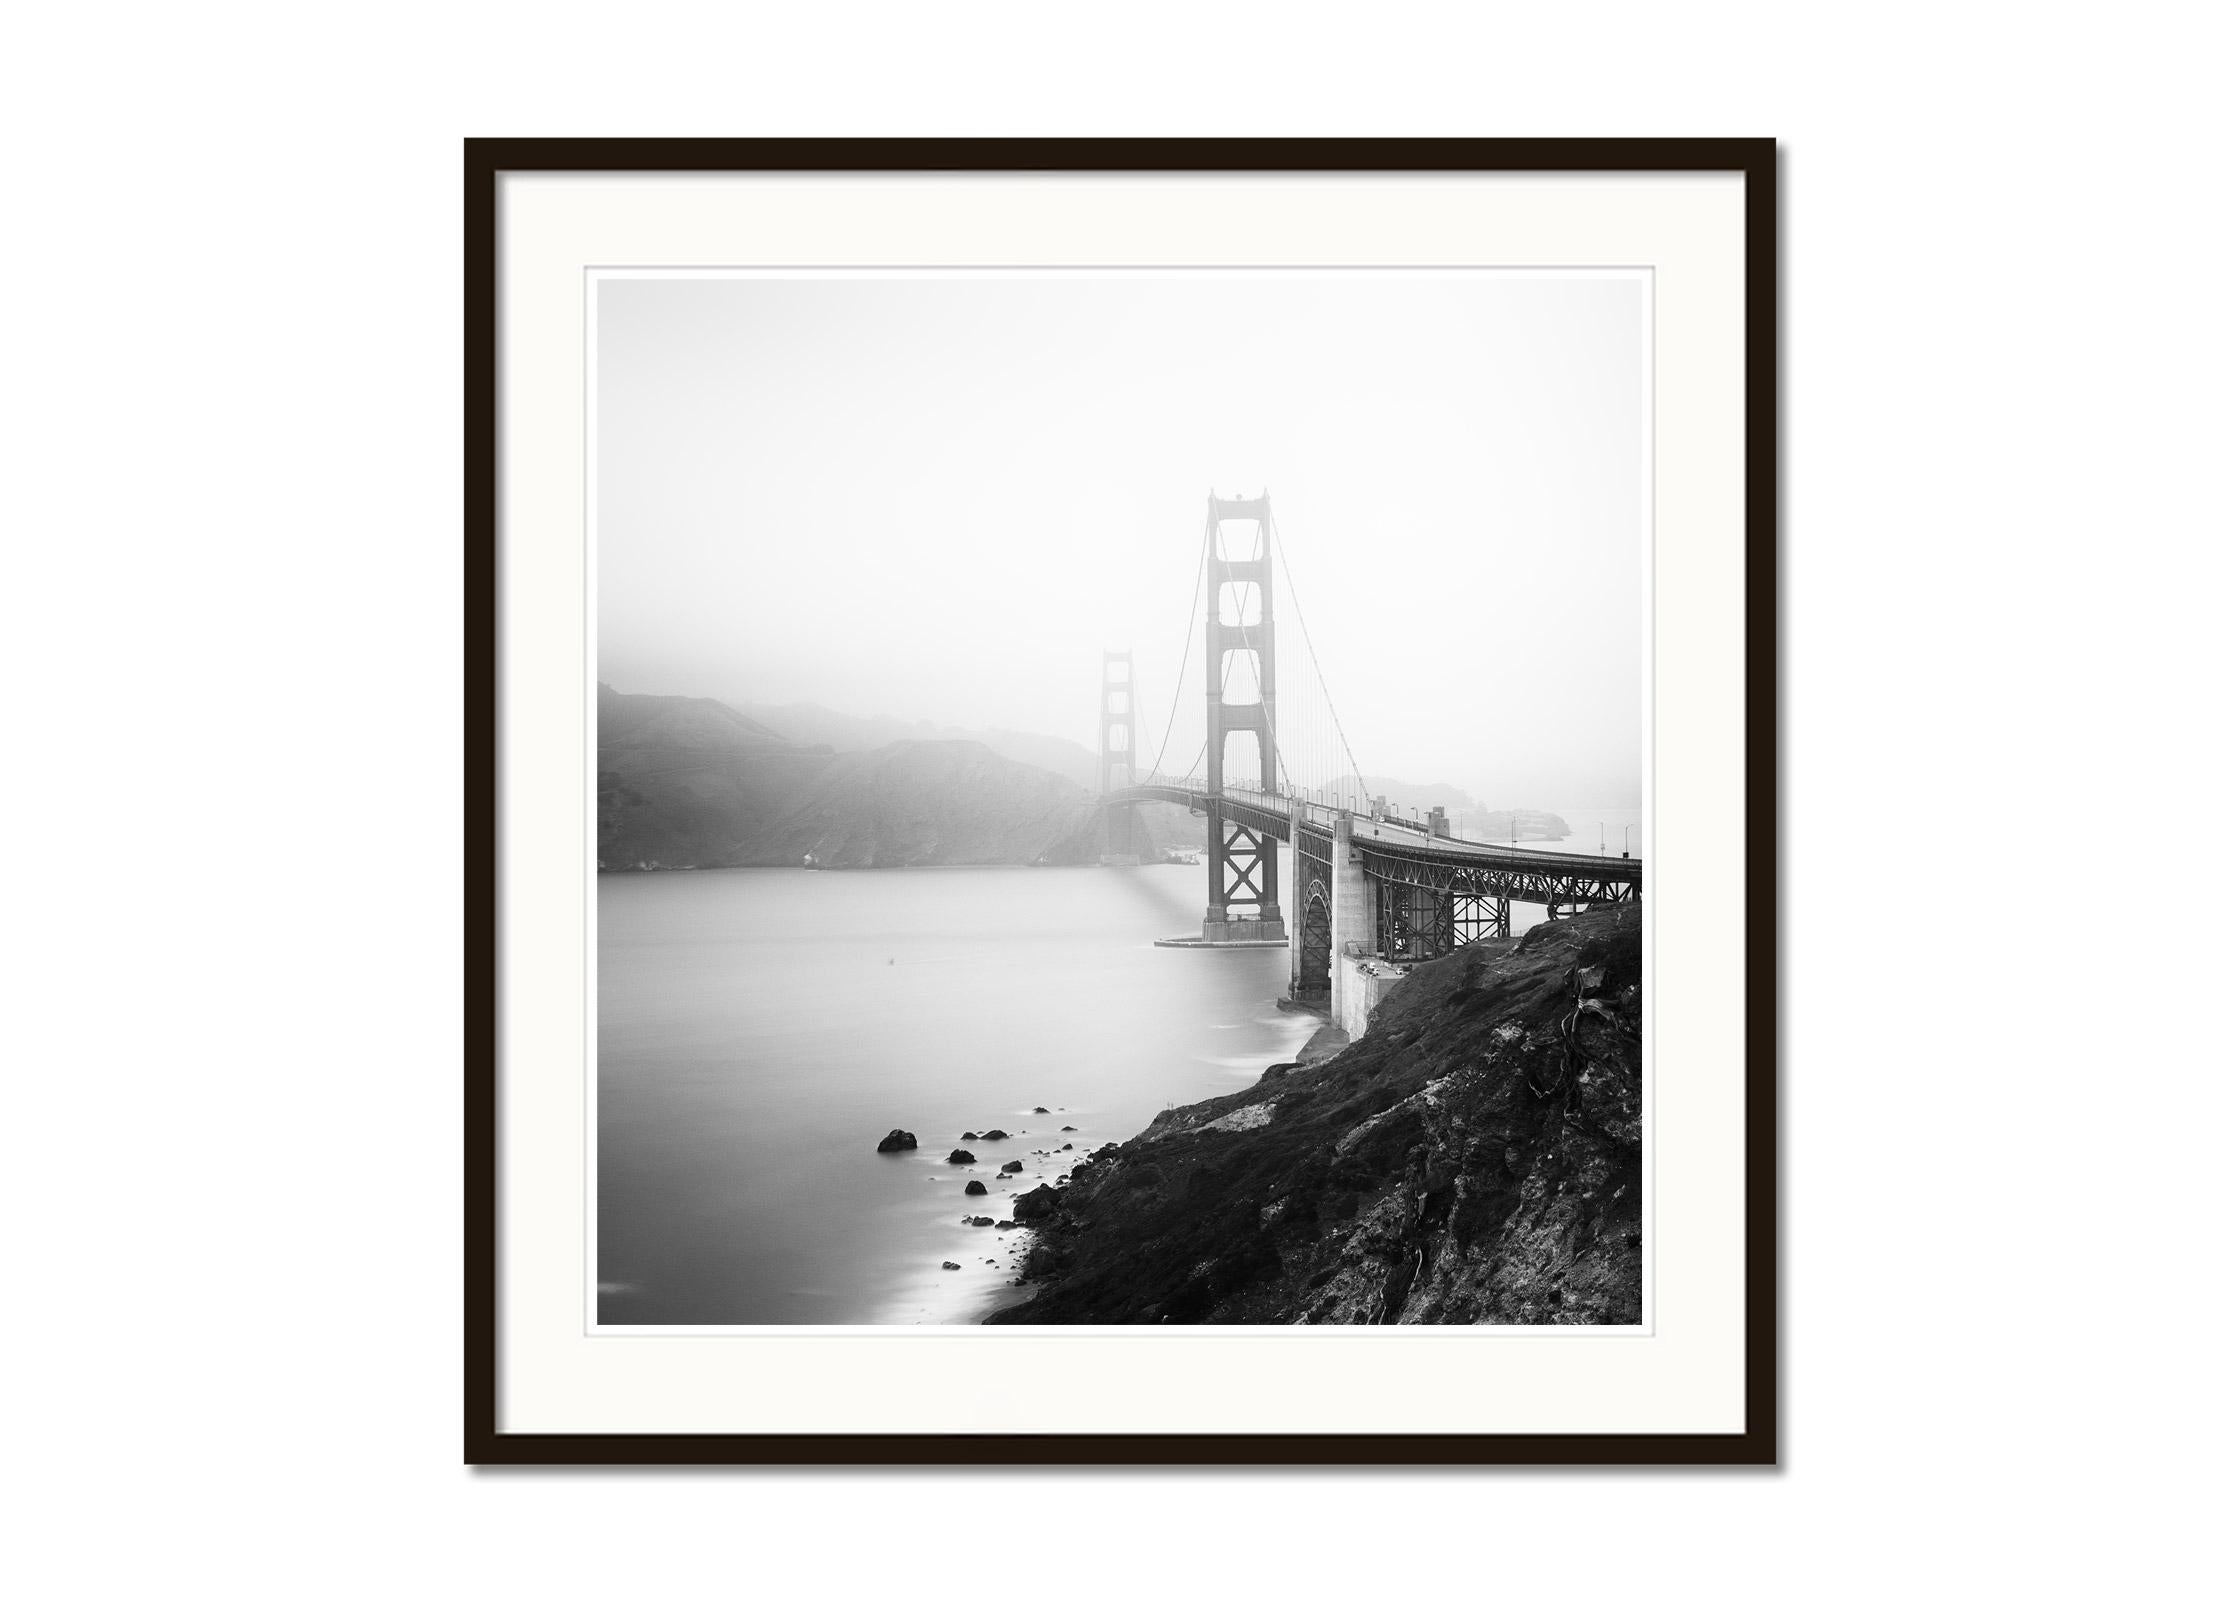 Golden Gate Bridge, San Francisco, Architecture, black and white fine art print - Gray Black and White Photograph by Gerald Berghammer, Ina Forstinger